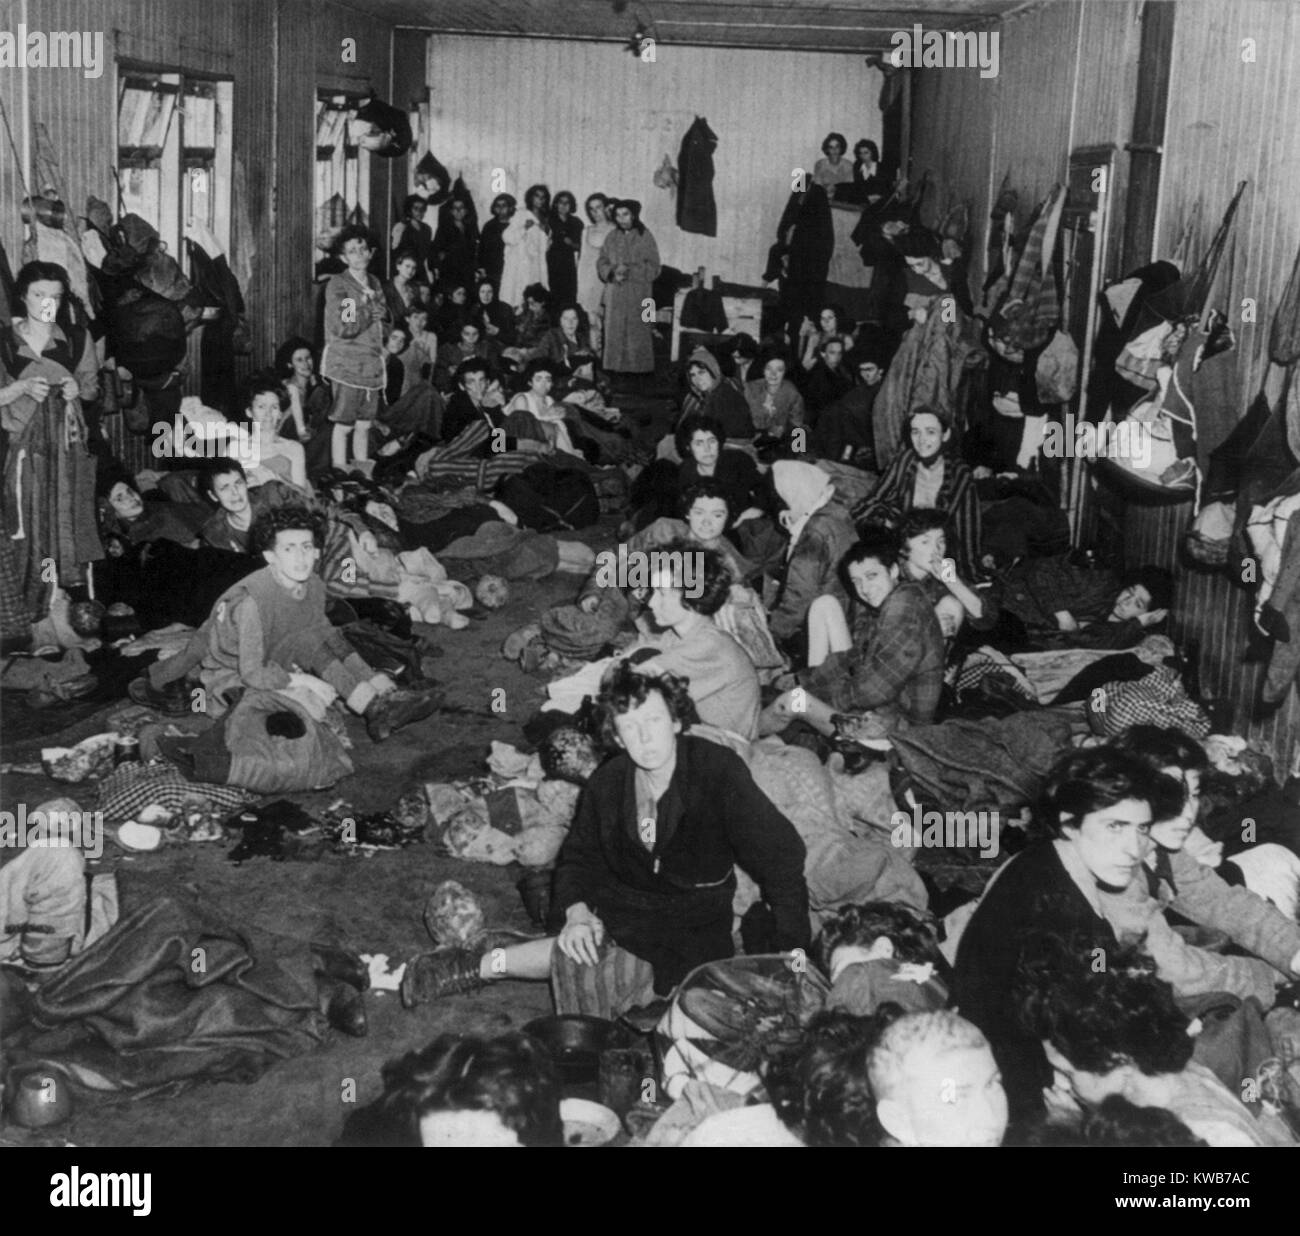 Women and children in a crowd hut in 1943 Bergen-Belsen concentration camp. It was an 'exchange camp', where Jewish hostages were held to exchange for German prisoners or cash. Photo was taken after the camp's liberation by British and Canadian forces on April 15, 1945. World War 2. (BSLOC 2014 10 176) Stock Photo